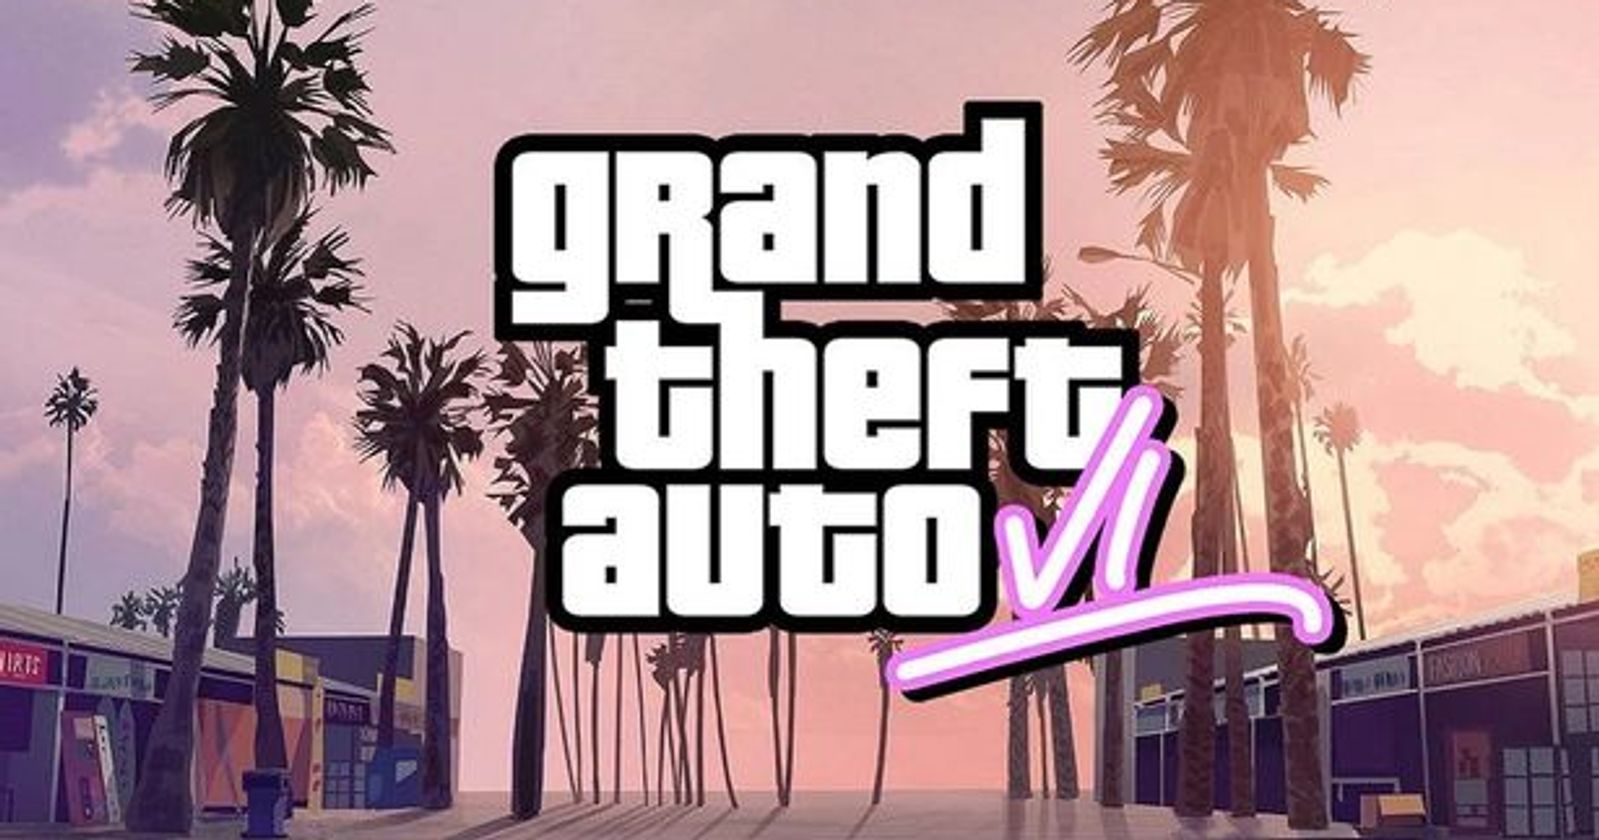 How a small group of GTA fanatics reverse-engineered GTA 3 and